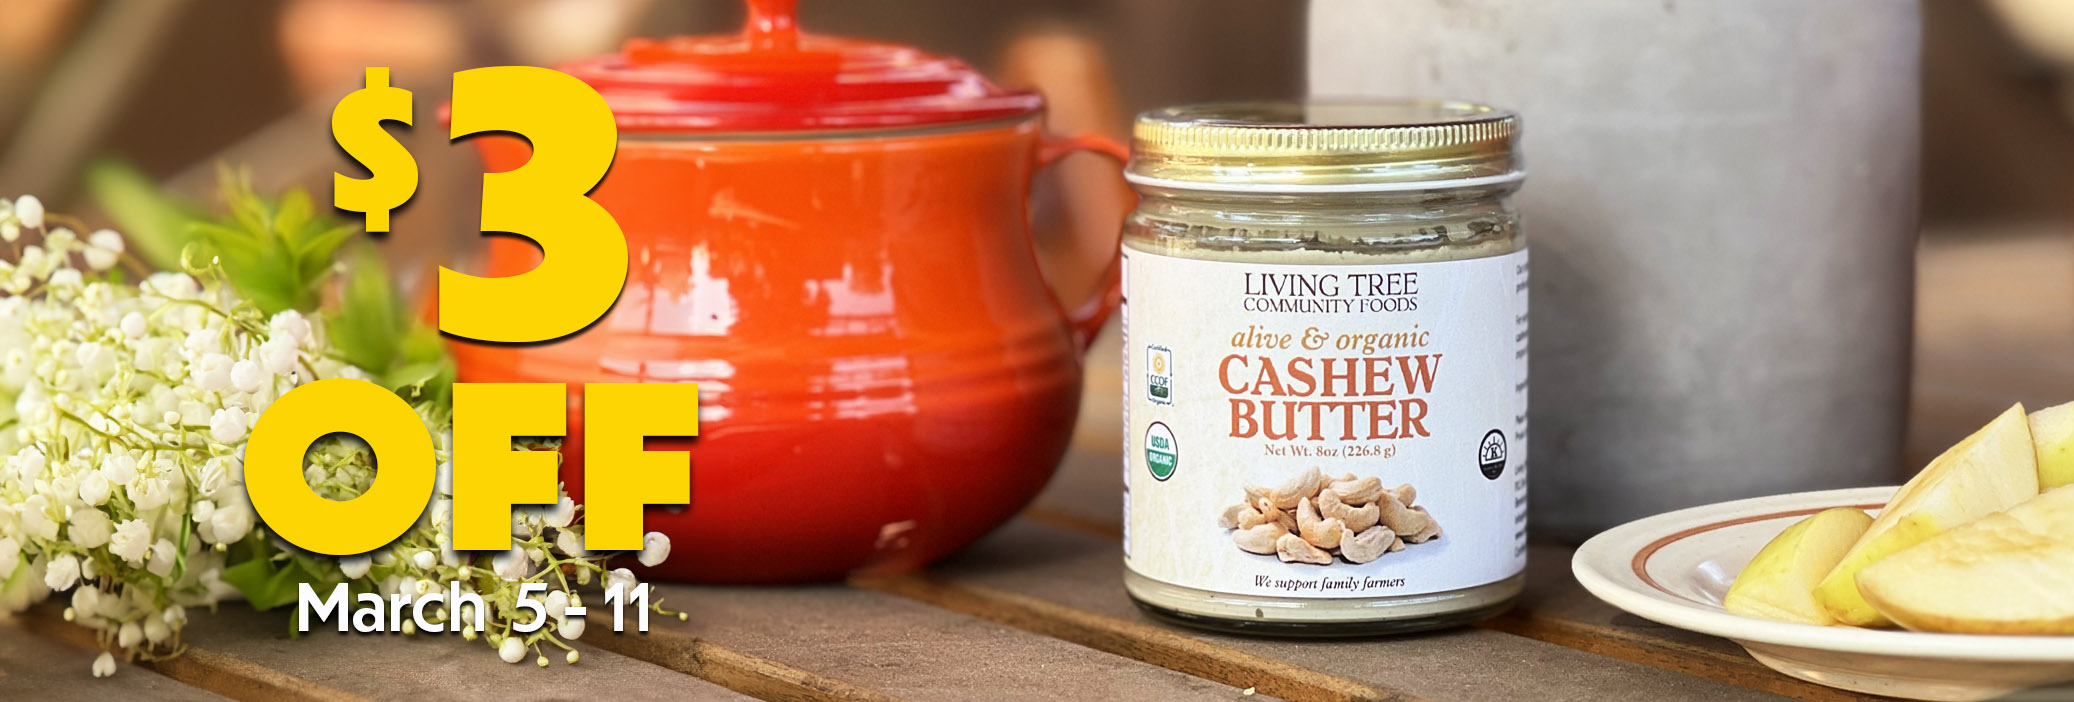 Cashew Butter 8oz Weekly Sale Banner